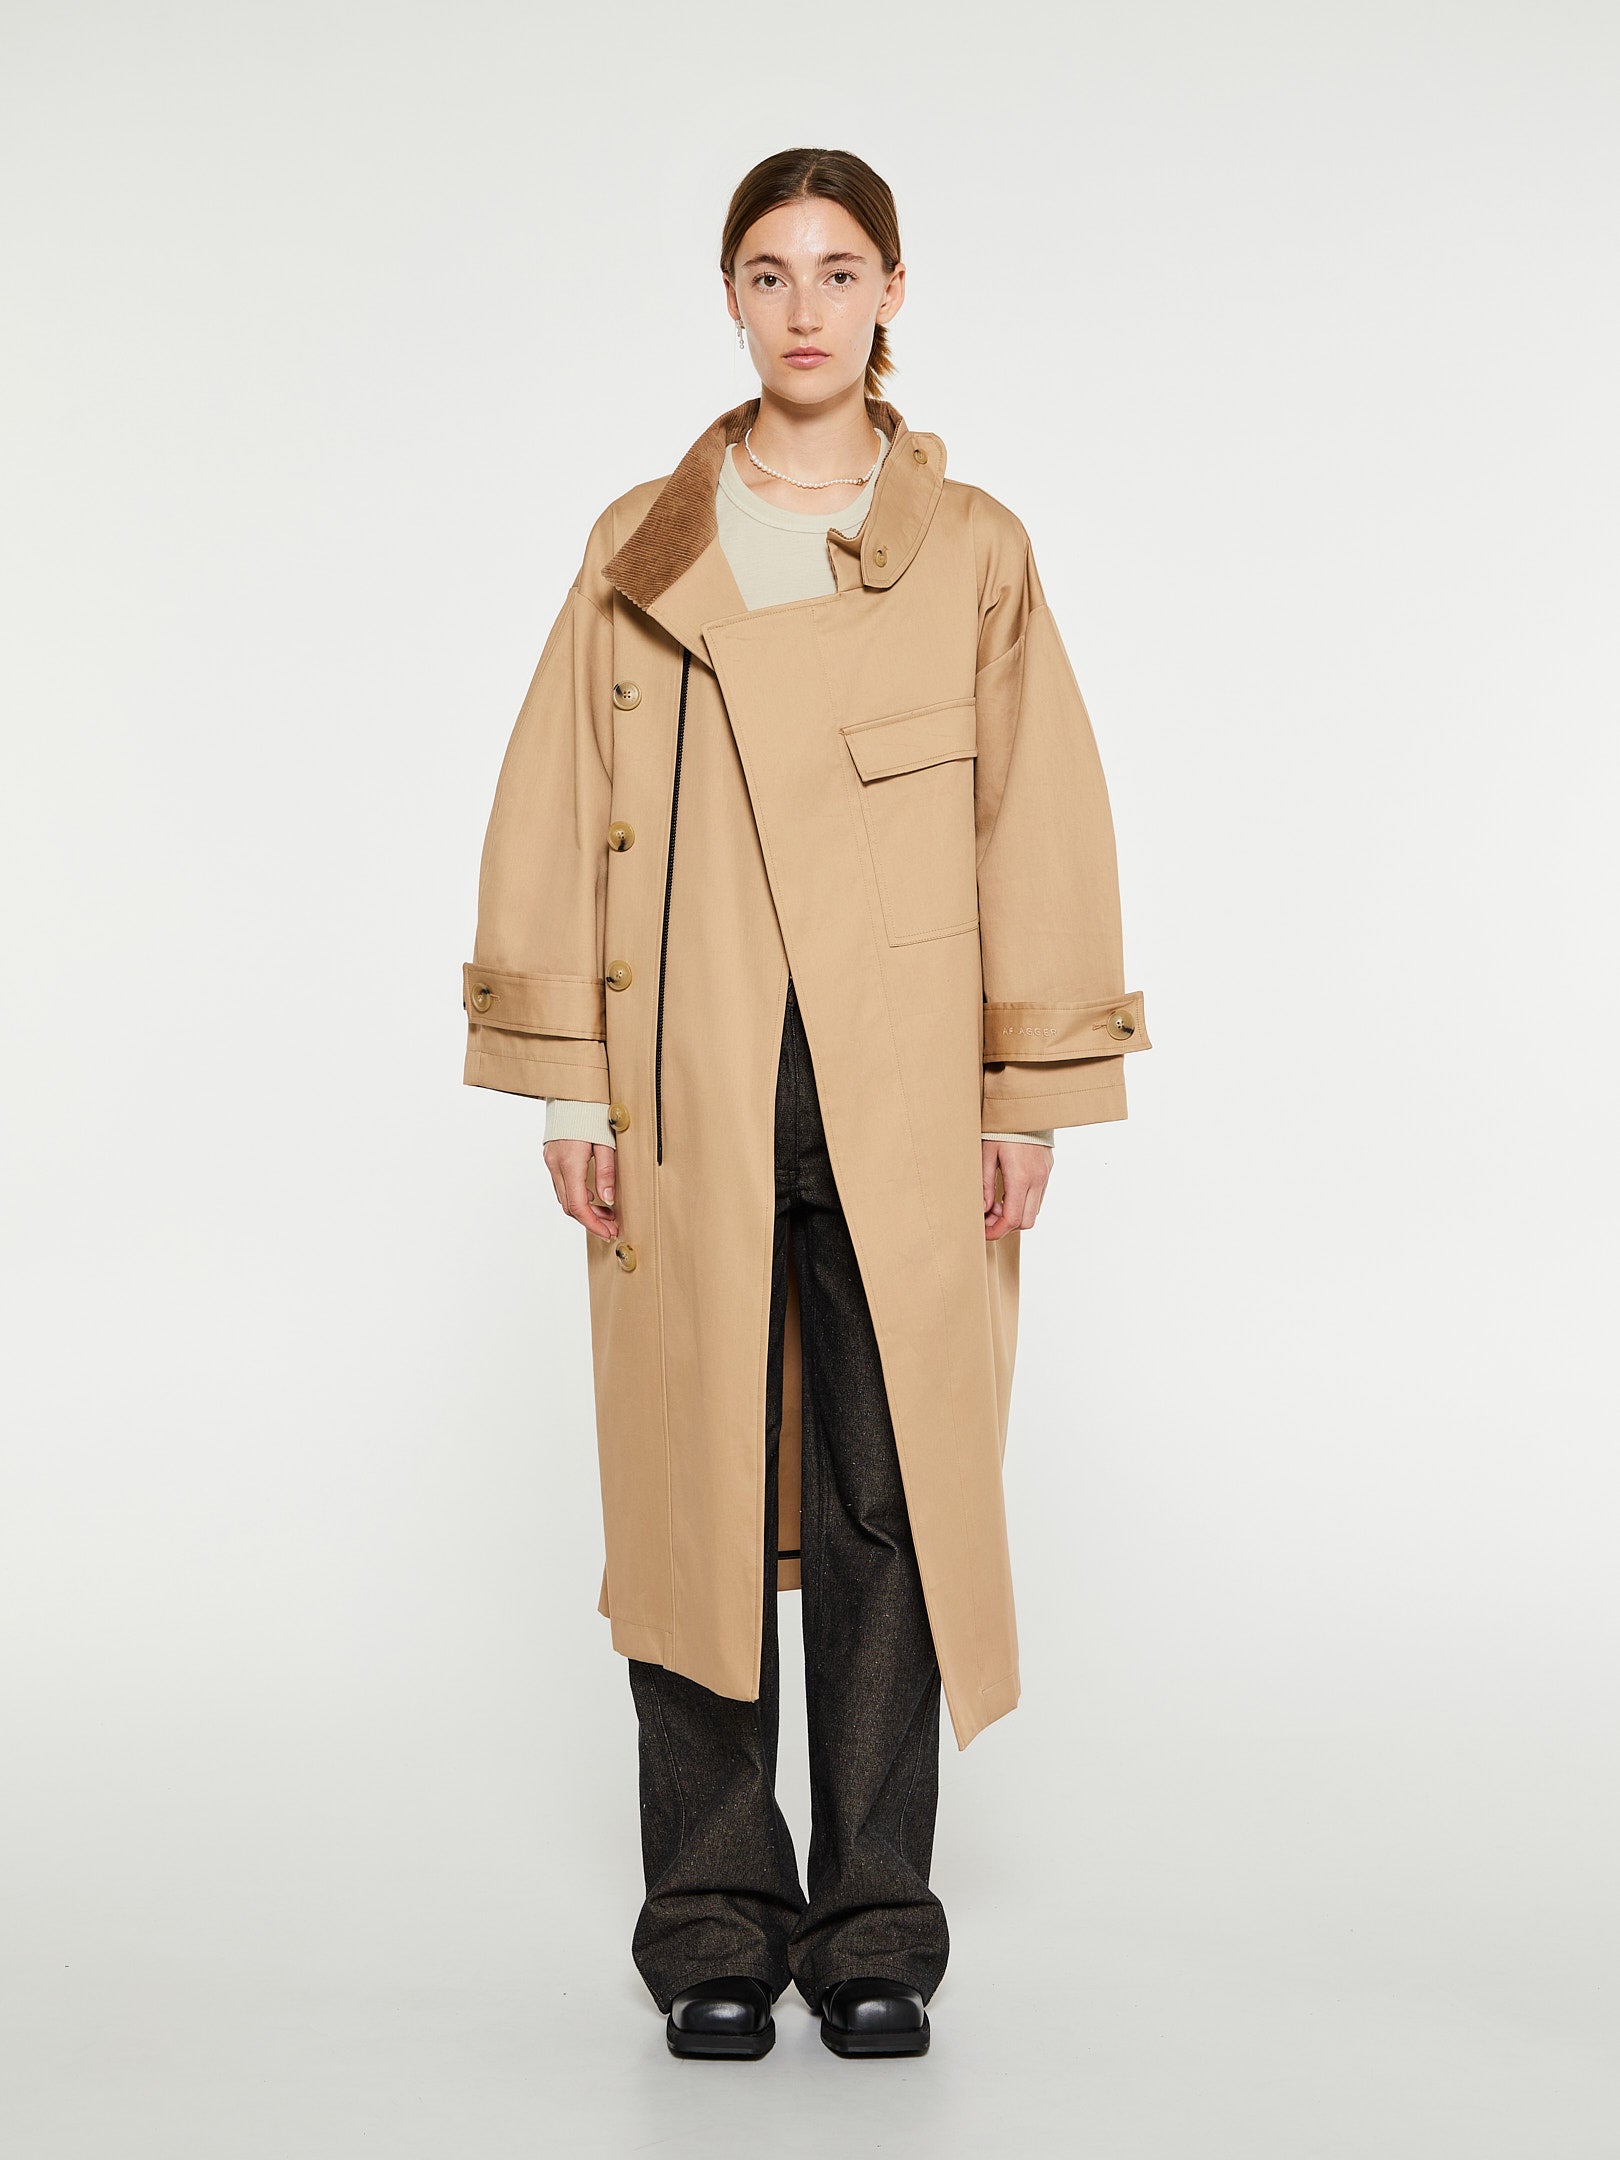 Coats & Jackets for stoy | women the at Shop selection